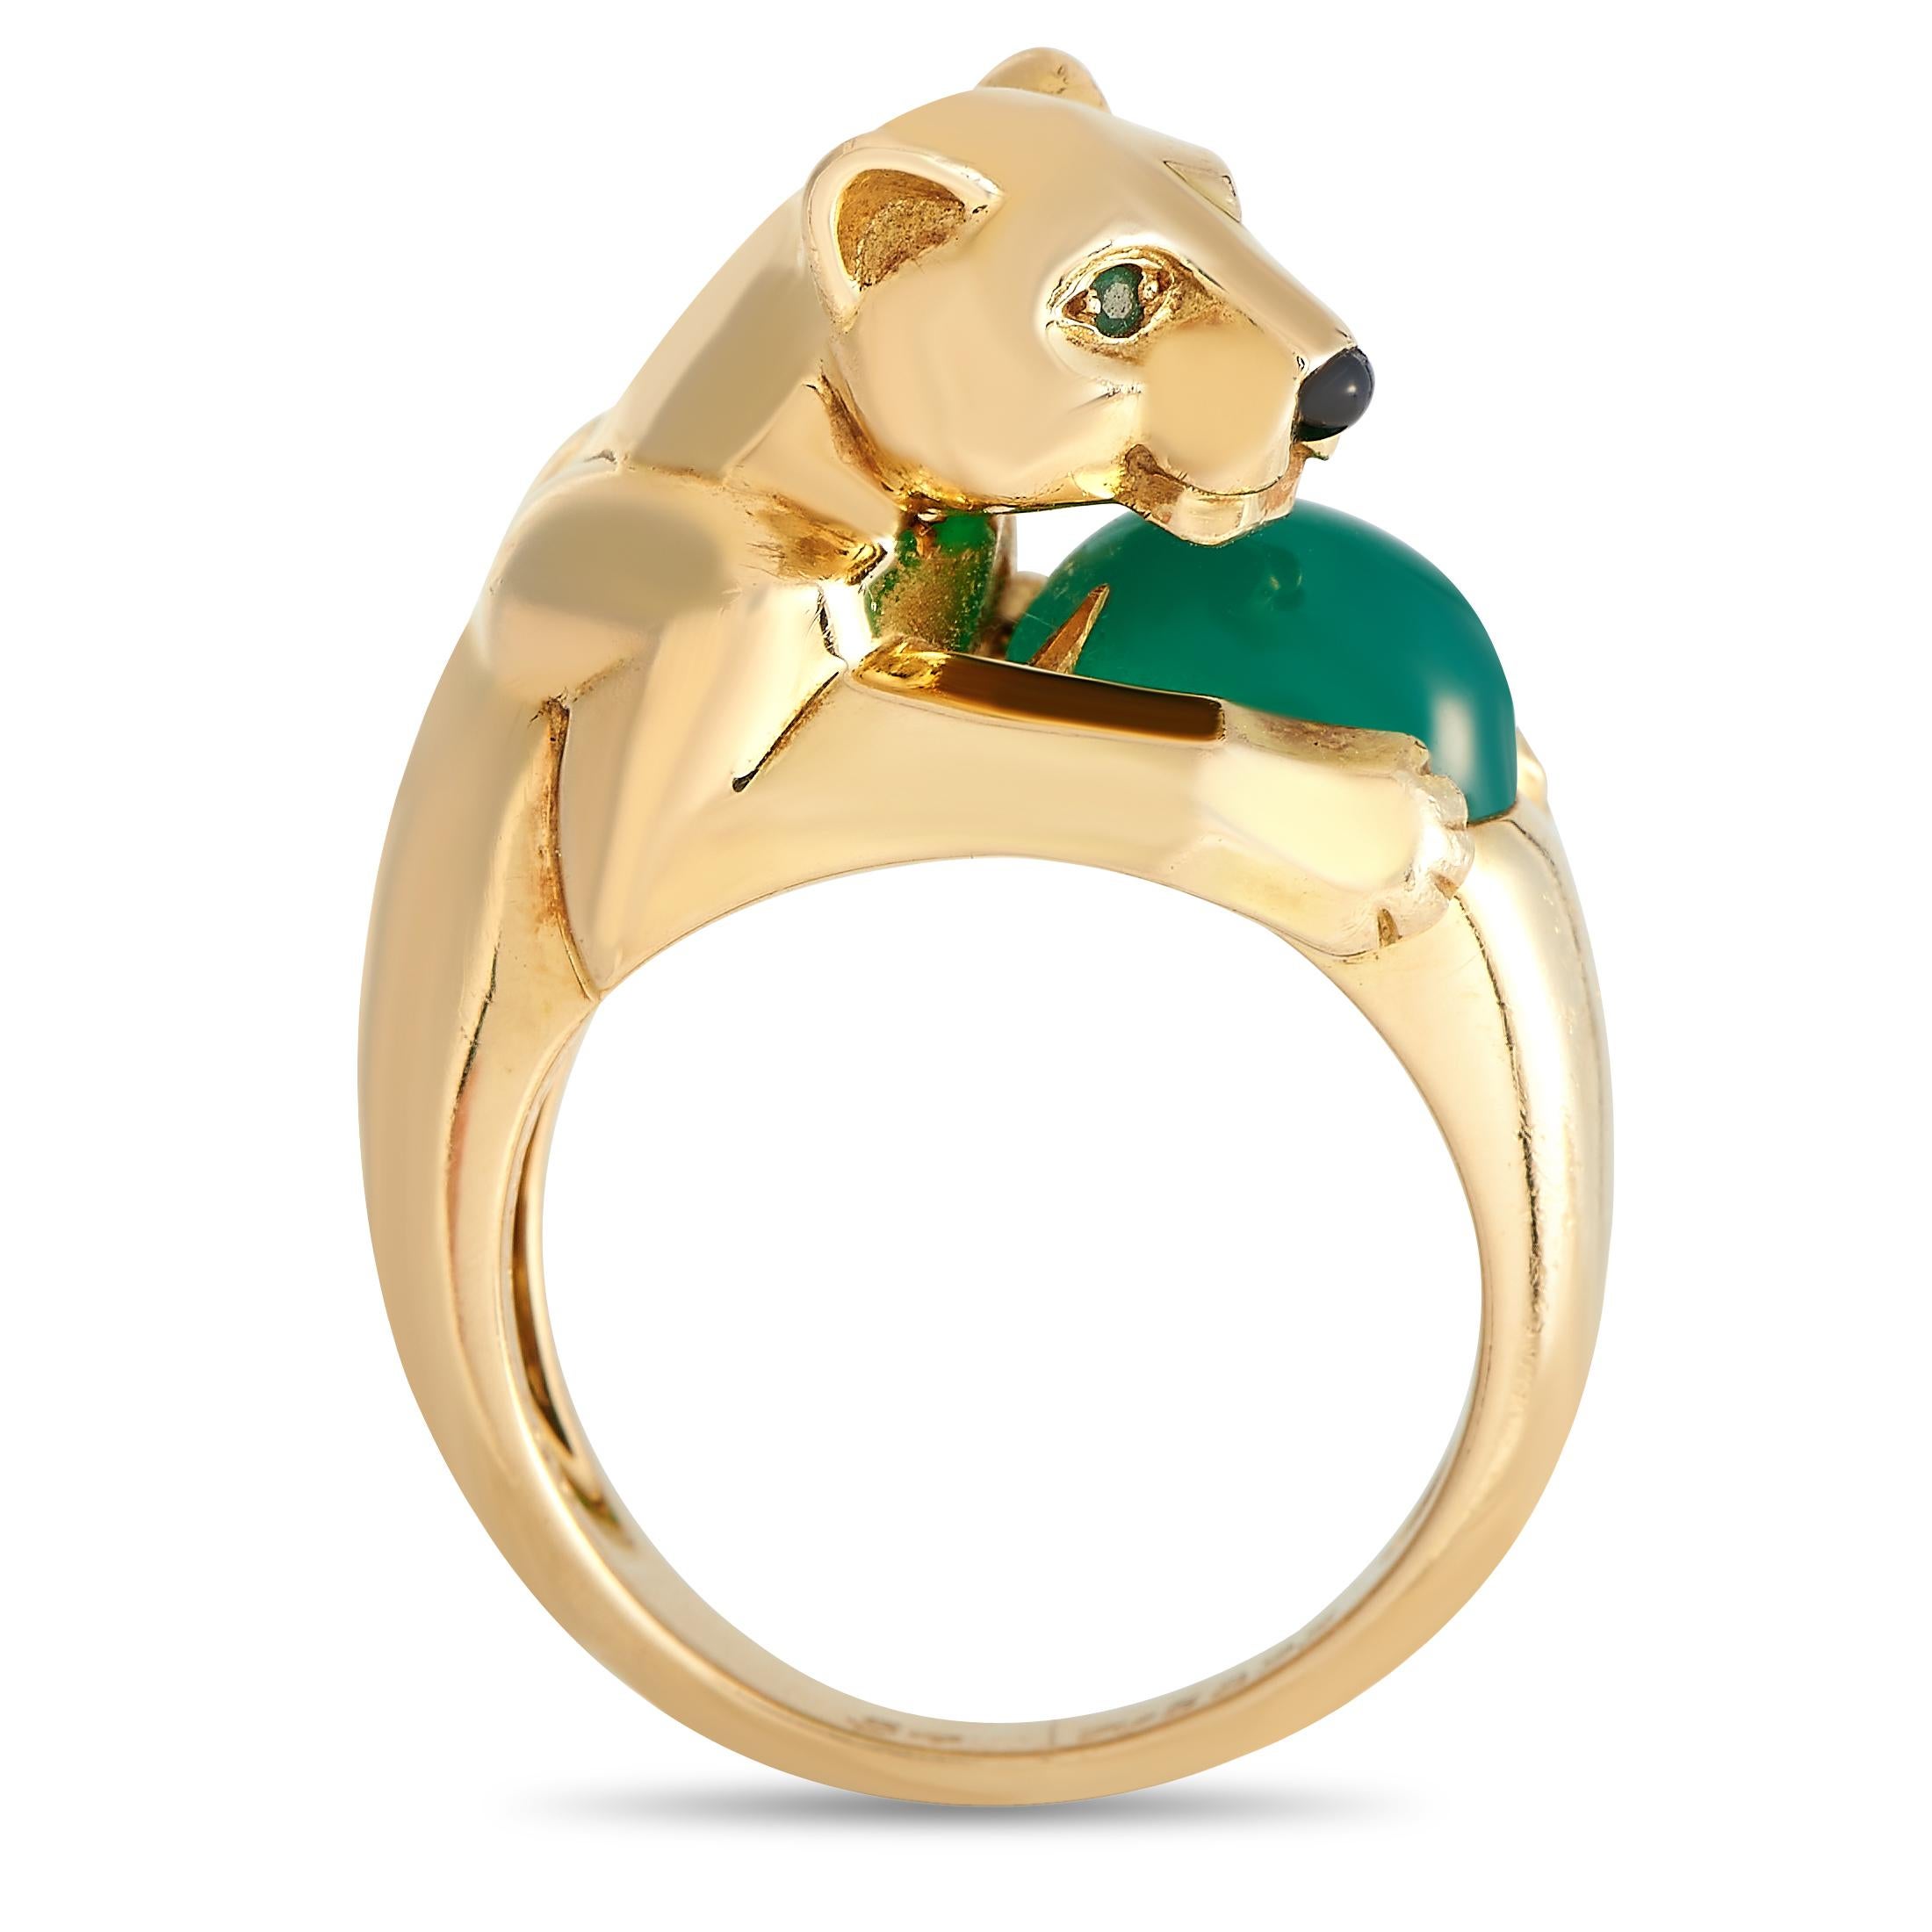 Crafted in 18K yellow gold, here is a Cartier ring with an ingenious design. The band boasts a sculpted panther with chalcedony eyes and an onyx nose. It clutches an oval chalcedony cabochon mounted securely on the band. This ring that symbolizes